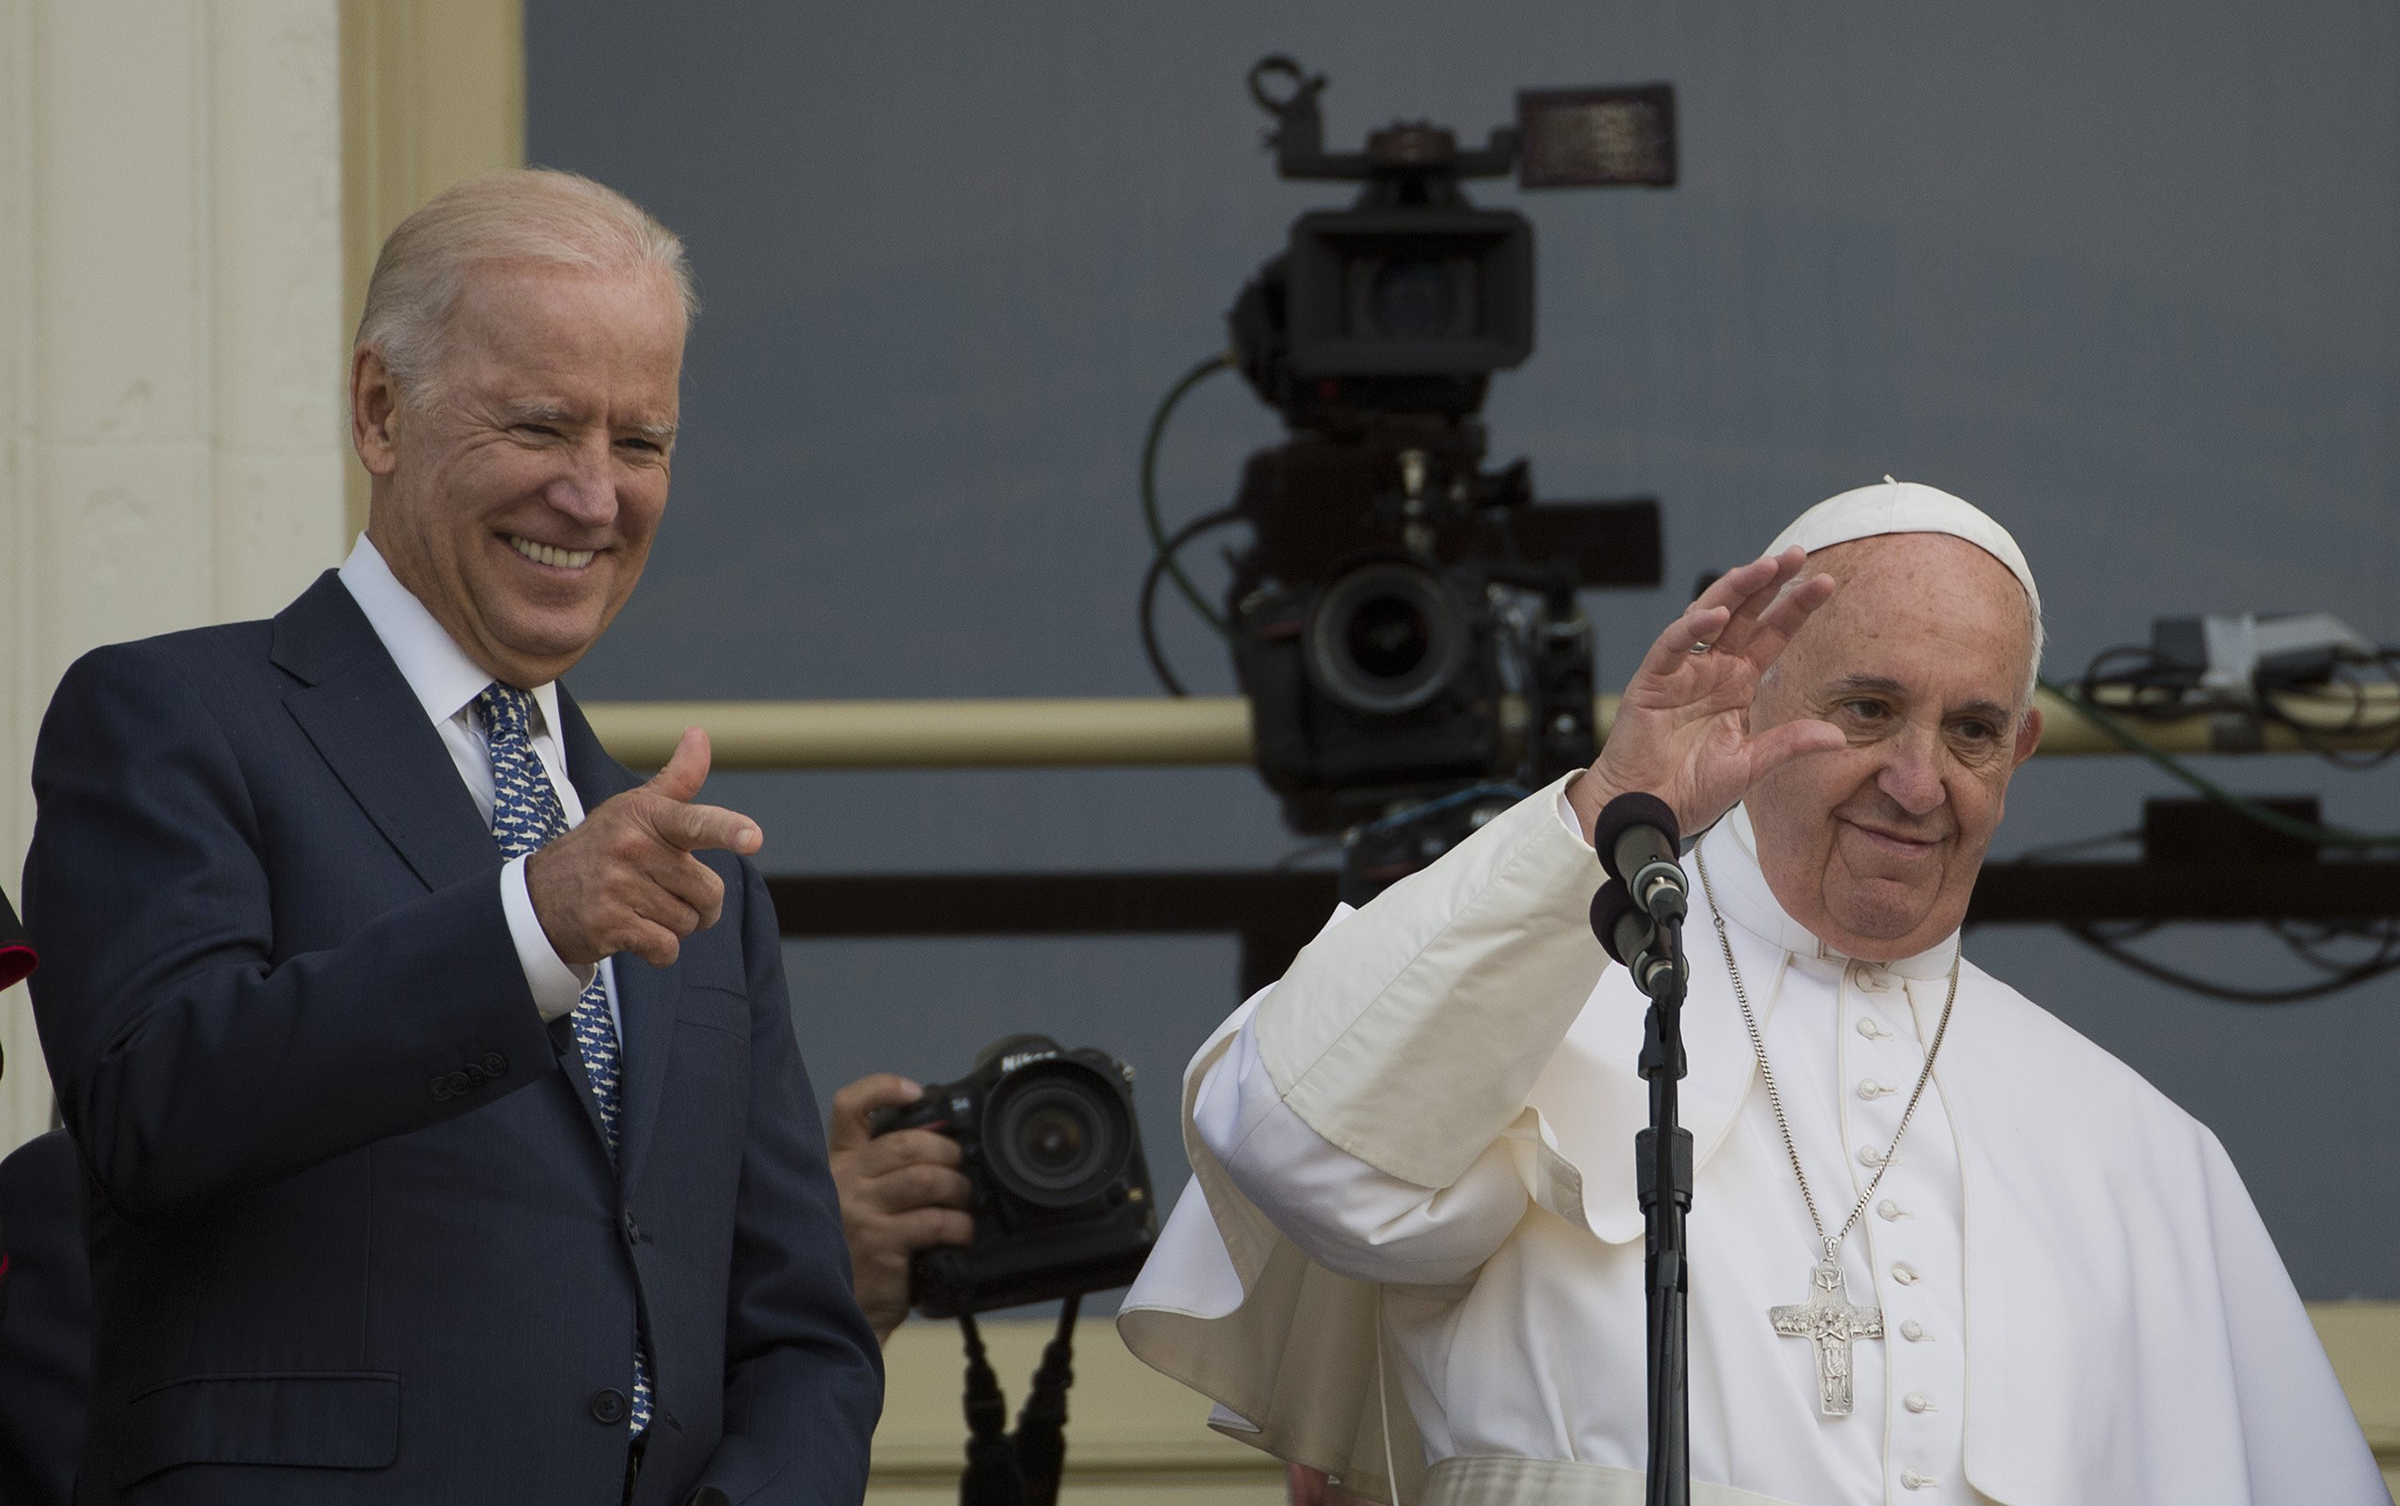 Biden with Pope Francis in Washington on Sept. 24, 2015, after the Pontiff’s address to a joint session of Congress (Andrew Caballero-Reynolds—AFP/Getty Images)